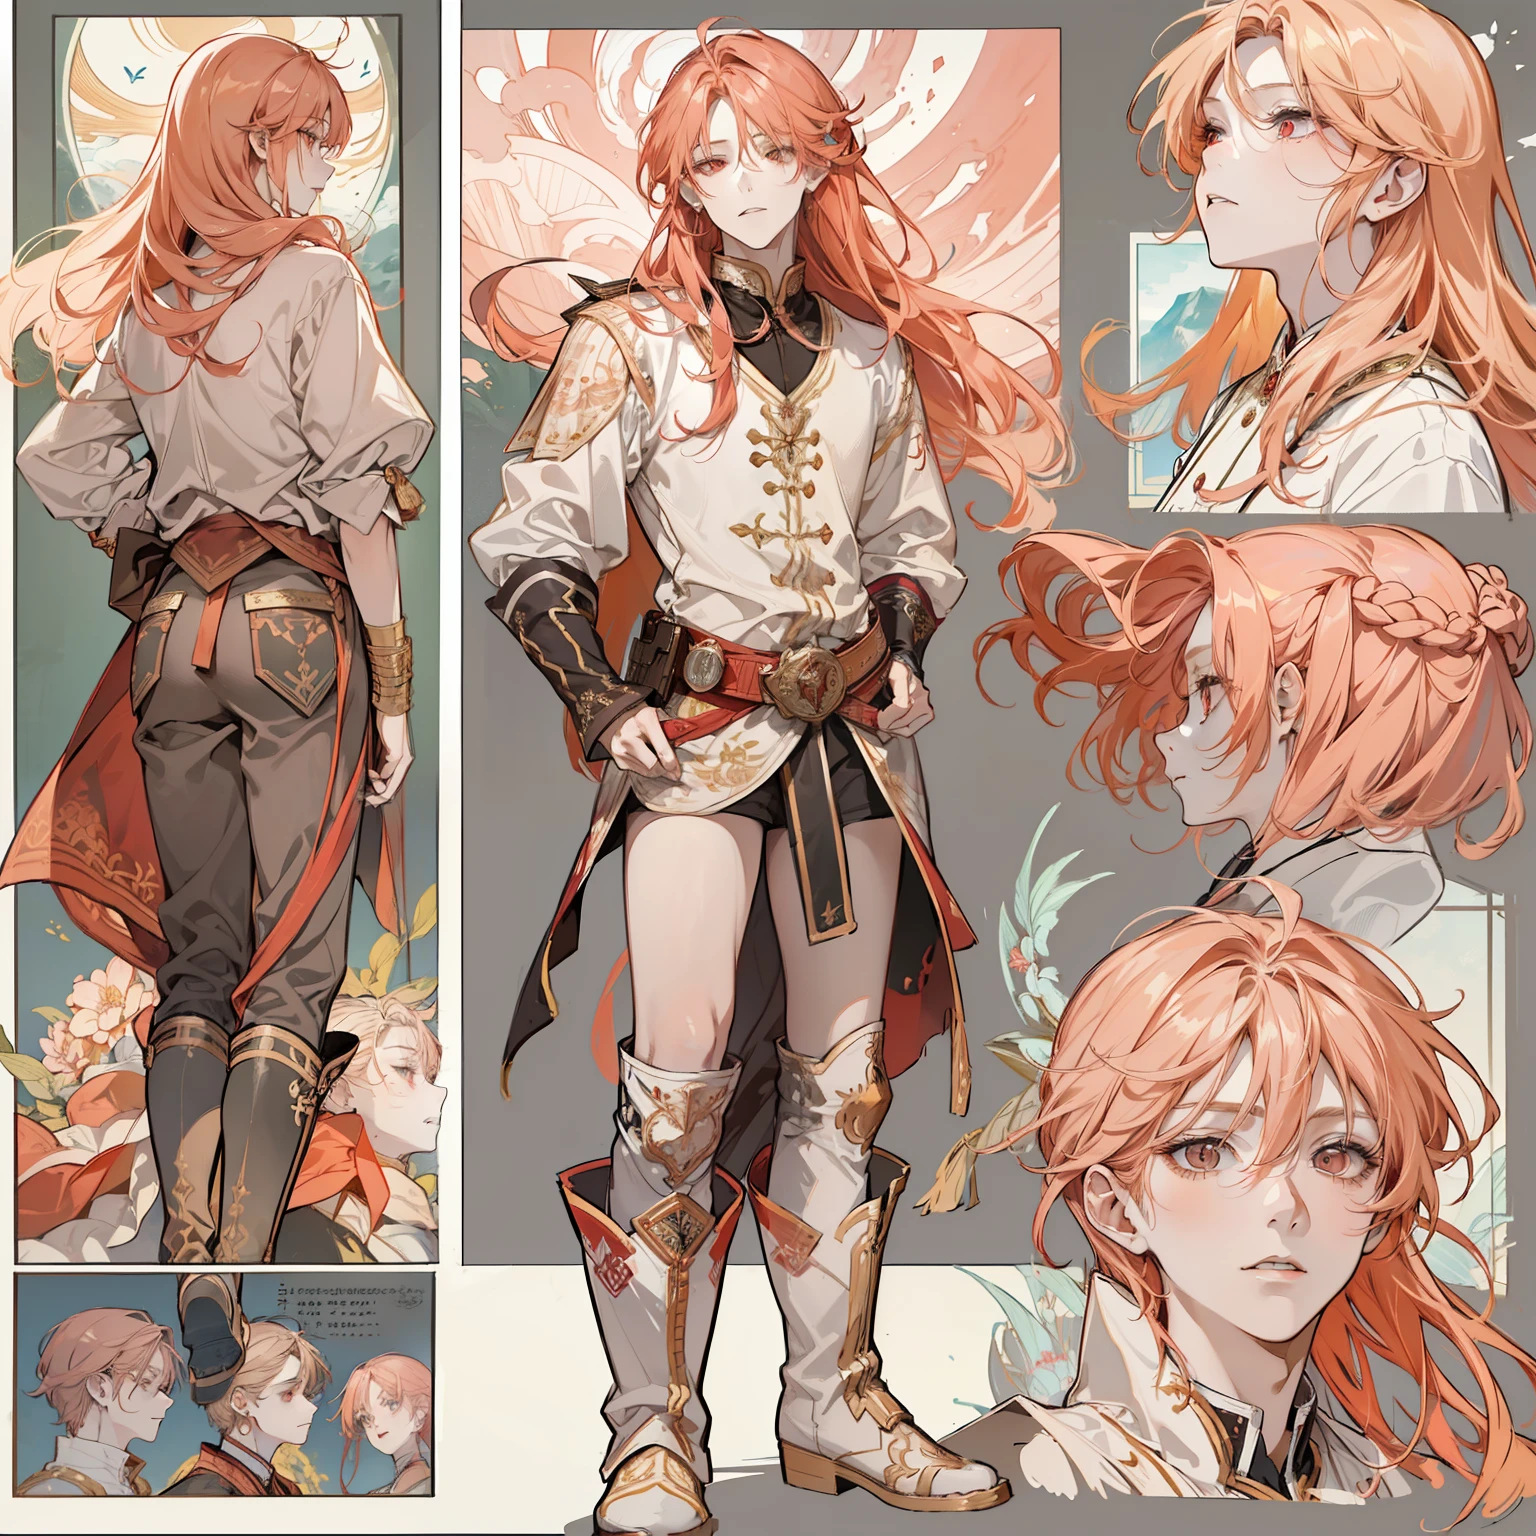 1 boy, solo, peach hair, light red-haired guy, straight hair, flowing straight hair, red eyes, shirt, high boots, Lightweight clothing, Scandinavia theme, Scandinavian clothes, looking at viewer, fantasy art, beautiful painting, guwaika style, epic exquisite character art, stunning characters, man, lean (reference sheet:1.5)